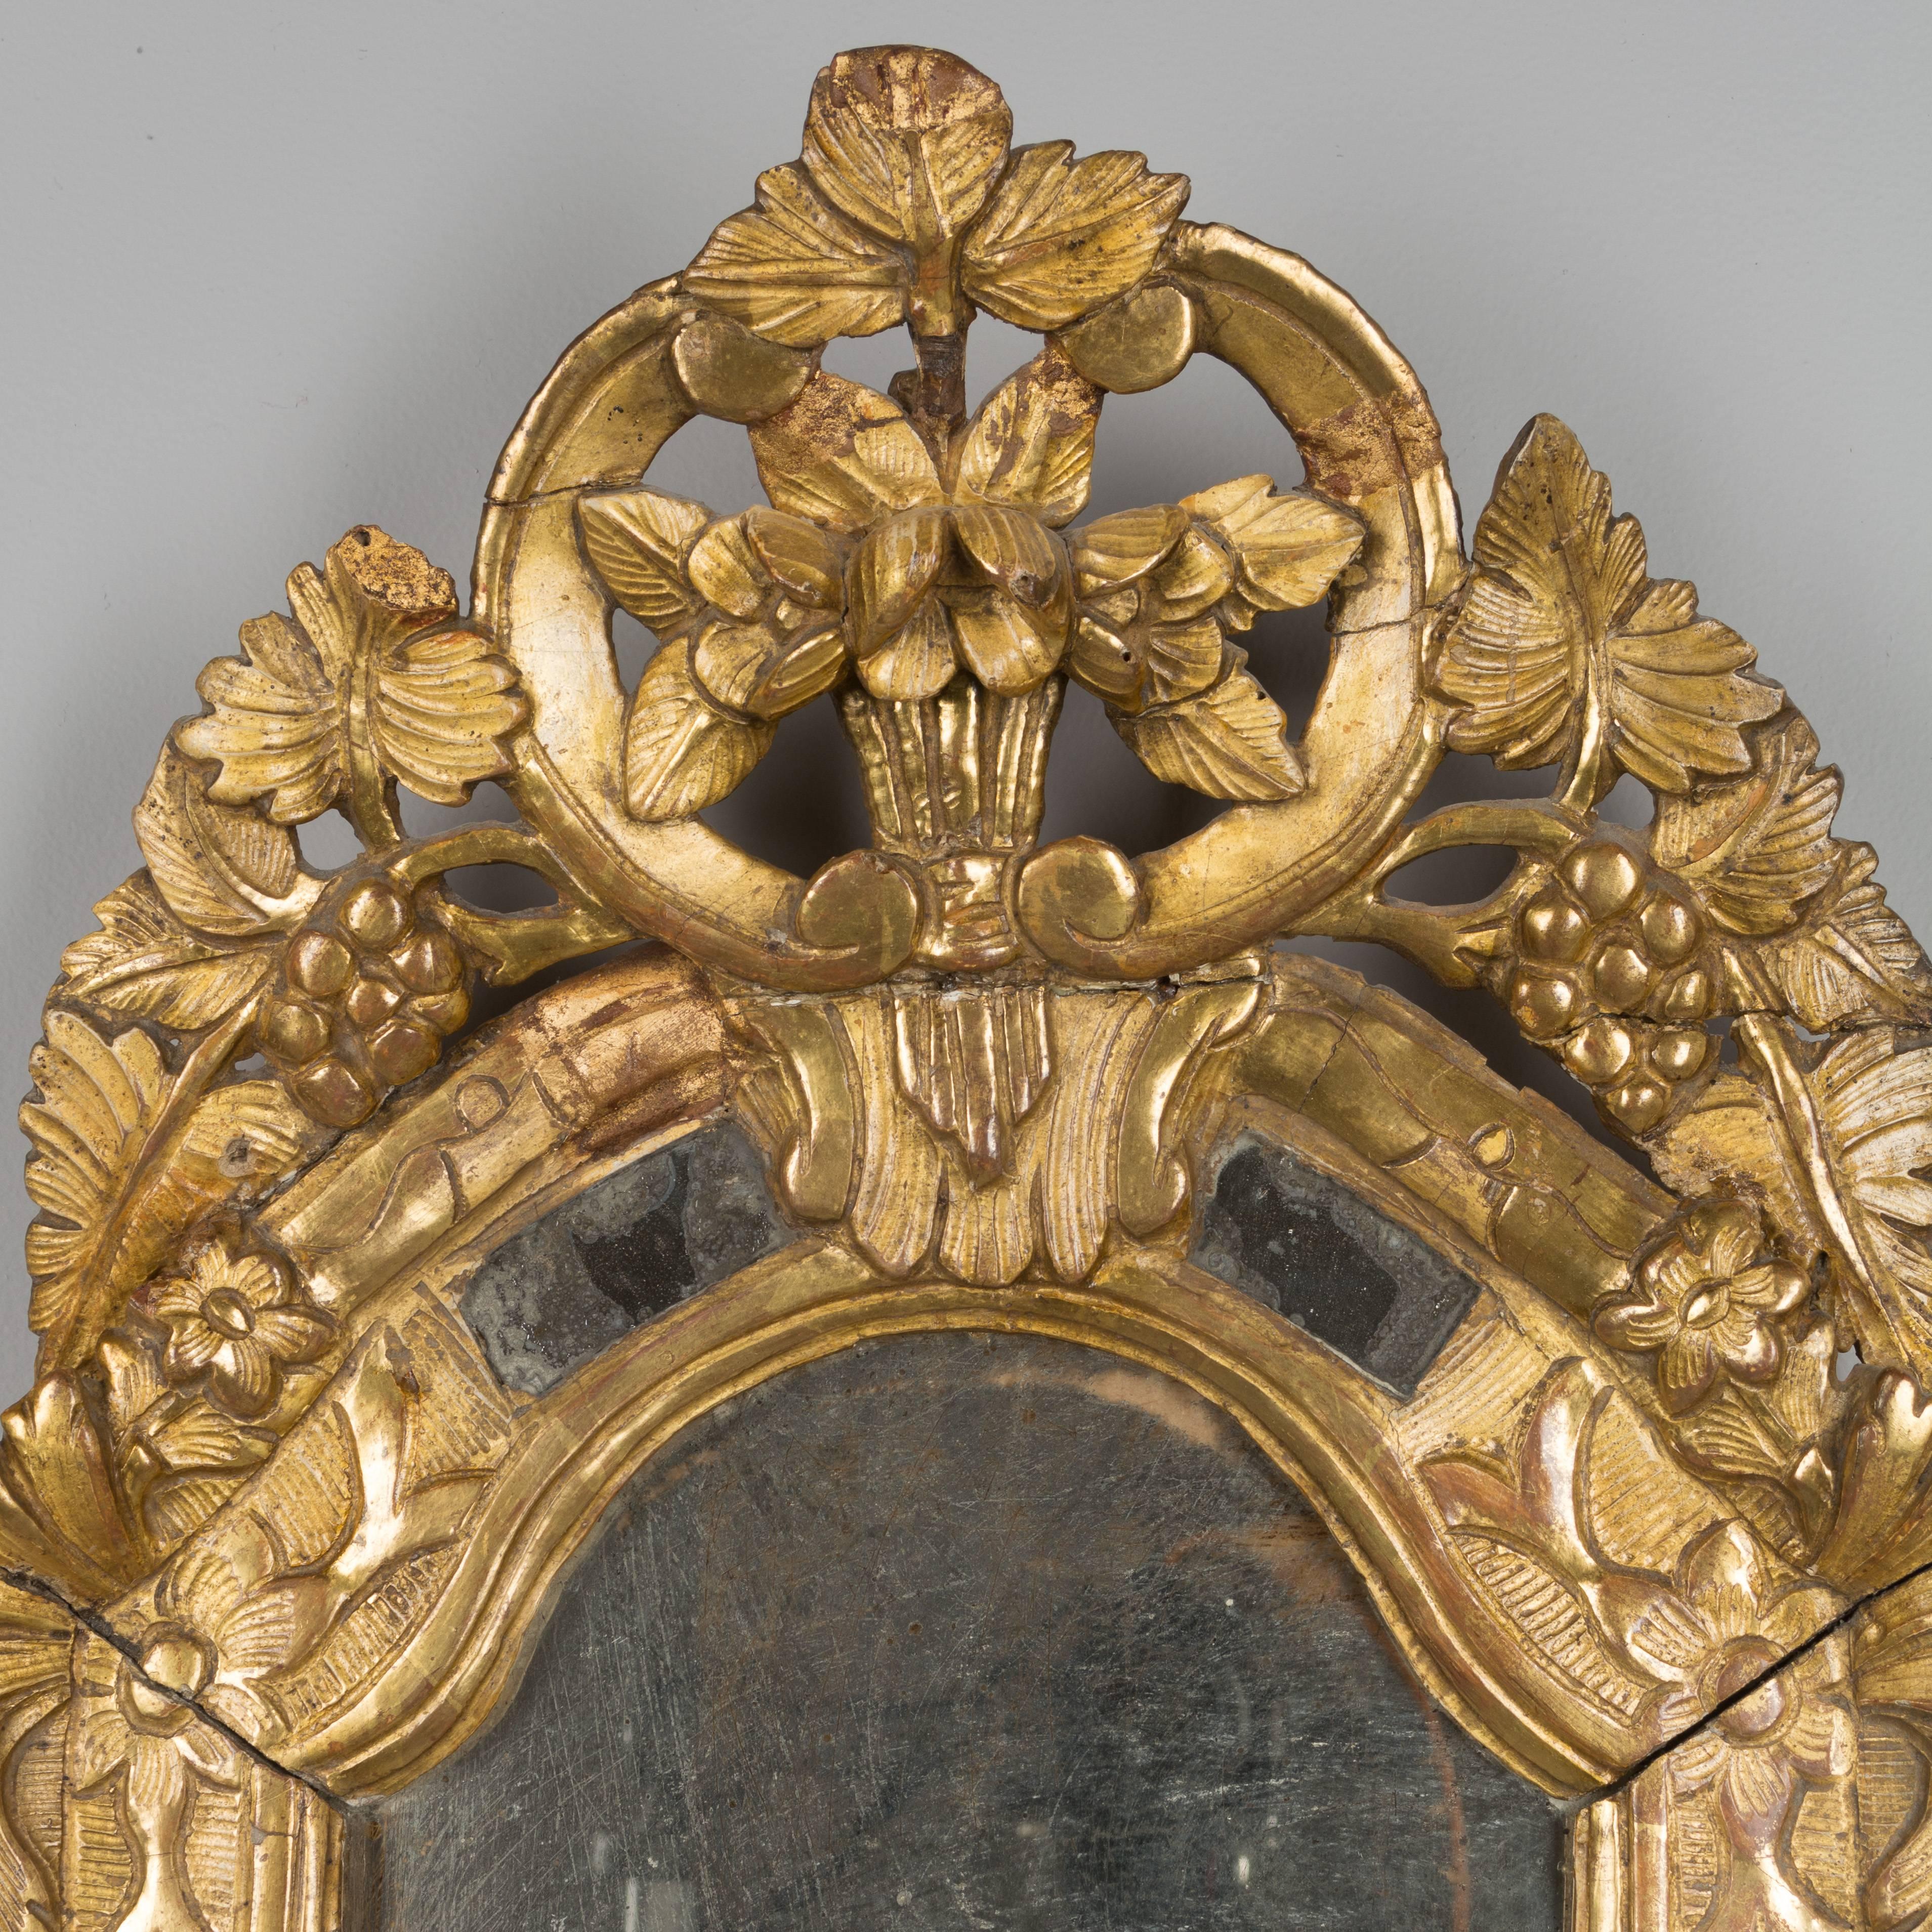 An 18th century. French Regency period gilded wood and gesso mirror. Beautiful carved details. Original looking glass with old silvering. In very good condition for its age with bright gilt and only minor losses. The crest has been reattached and is